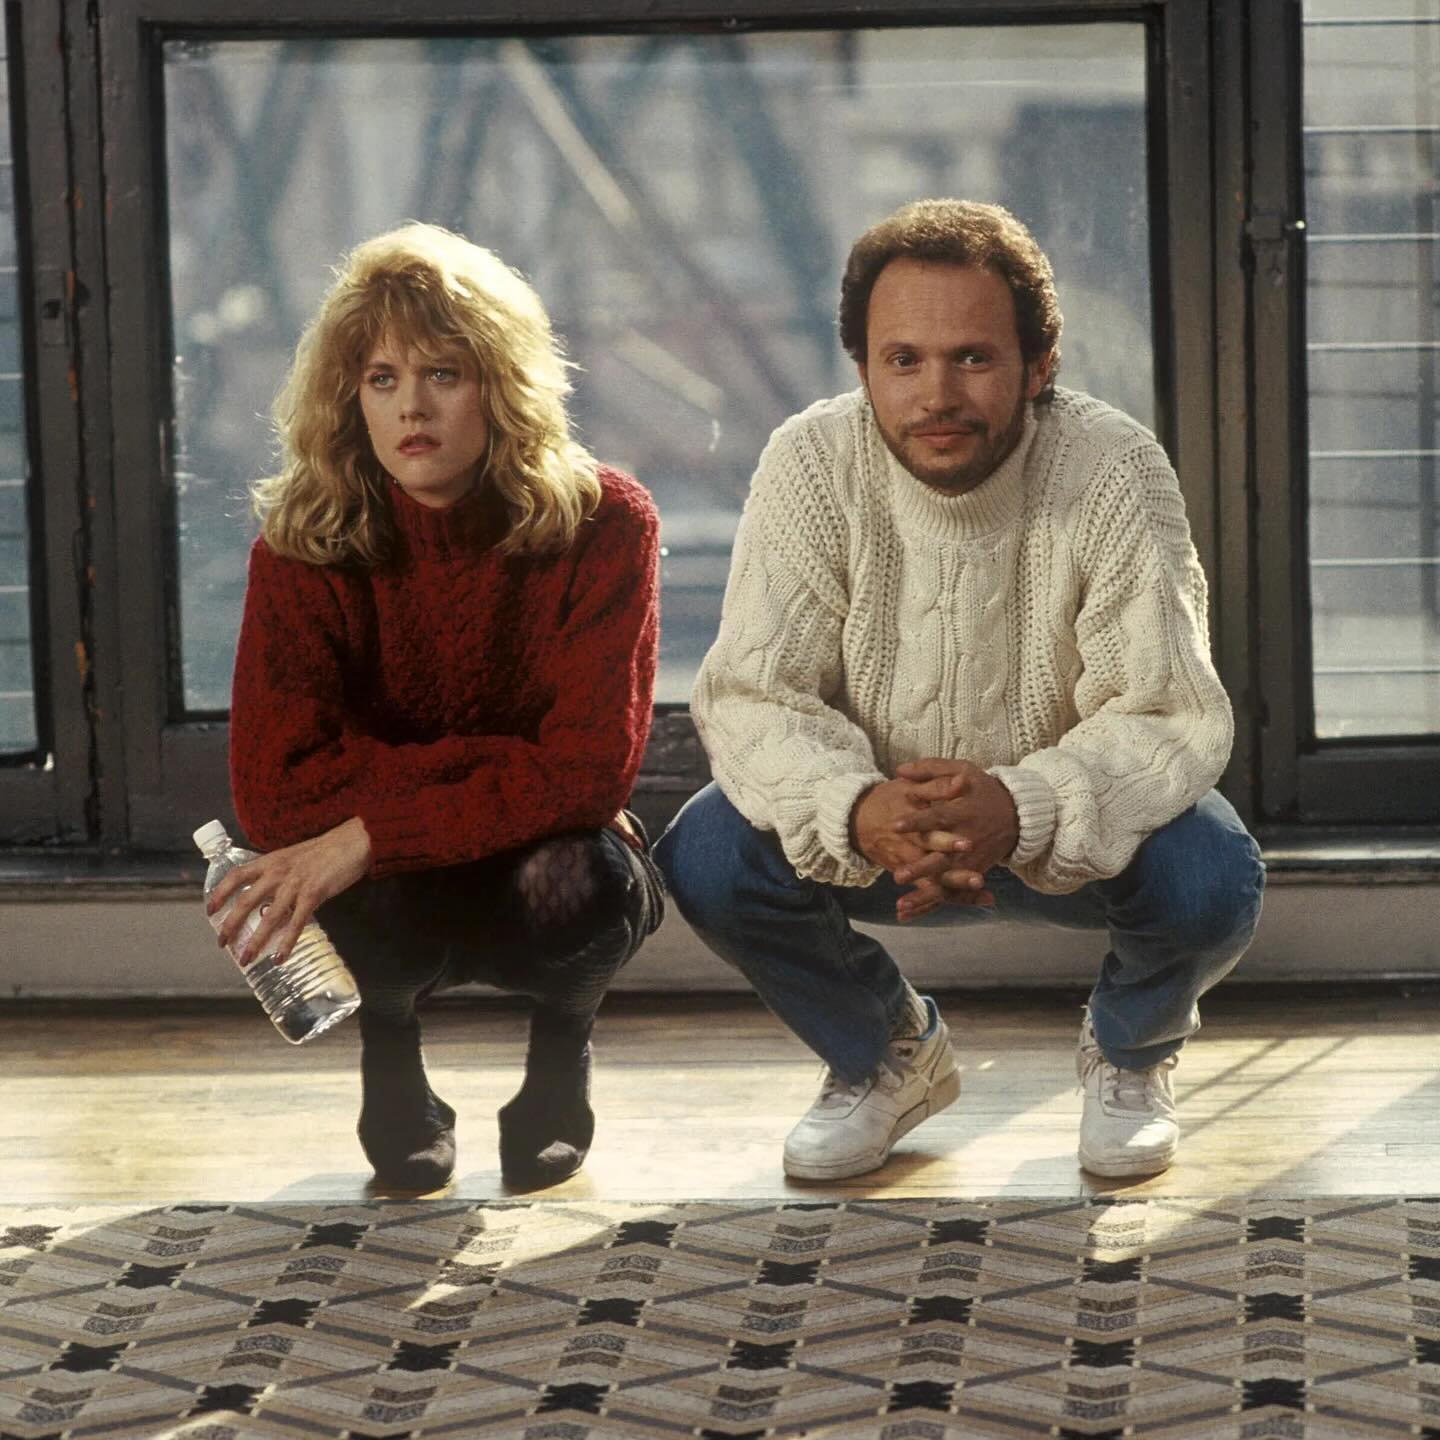 Let&rsquo;s take a nostalgic trip down memory lane to the days &ldquo;When Harry Met Sally...&rdquo; graced our Silvercup Studios sets! Fun fact: That heartwarming to-camera interview at the end? Completely improvised! 👫 Here&rsquo;s to the on-set c